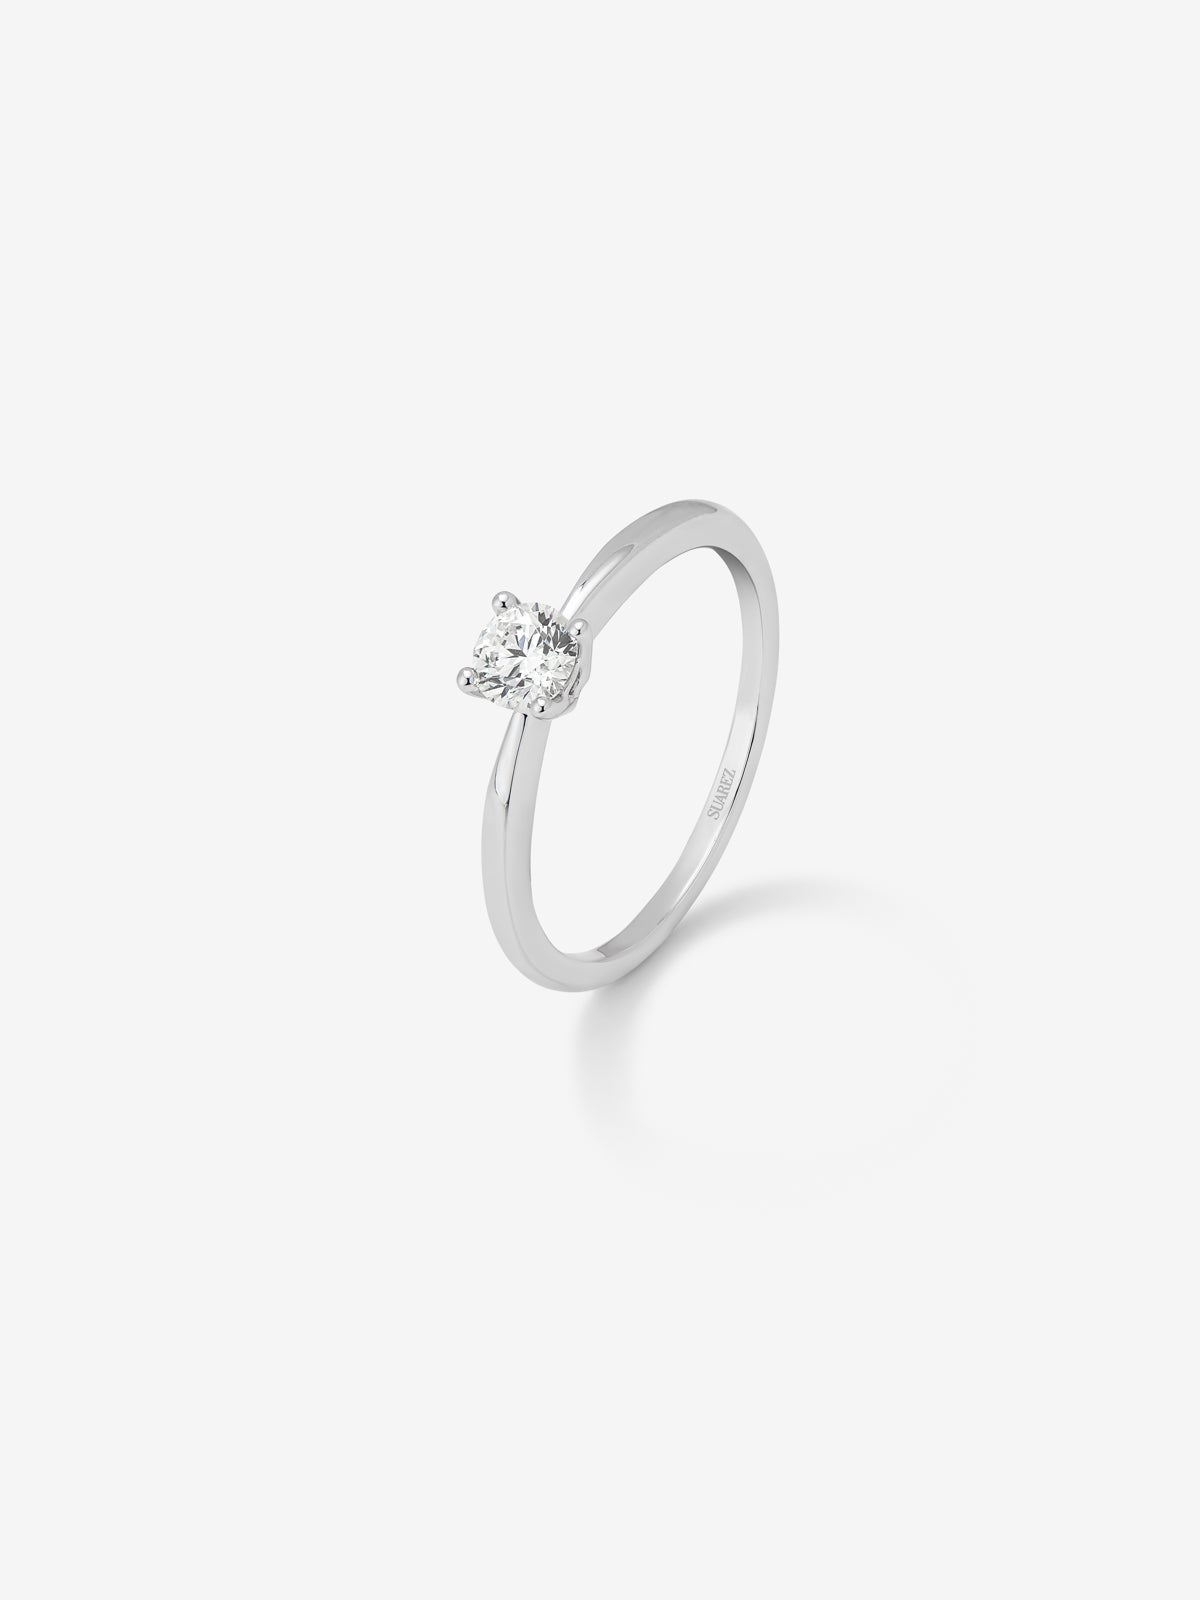 18K White Gold Solitary Ring with 0.09 CTS bright diamond